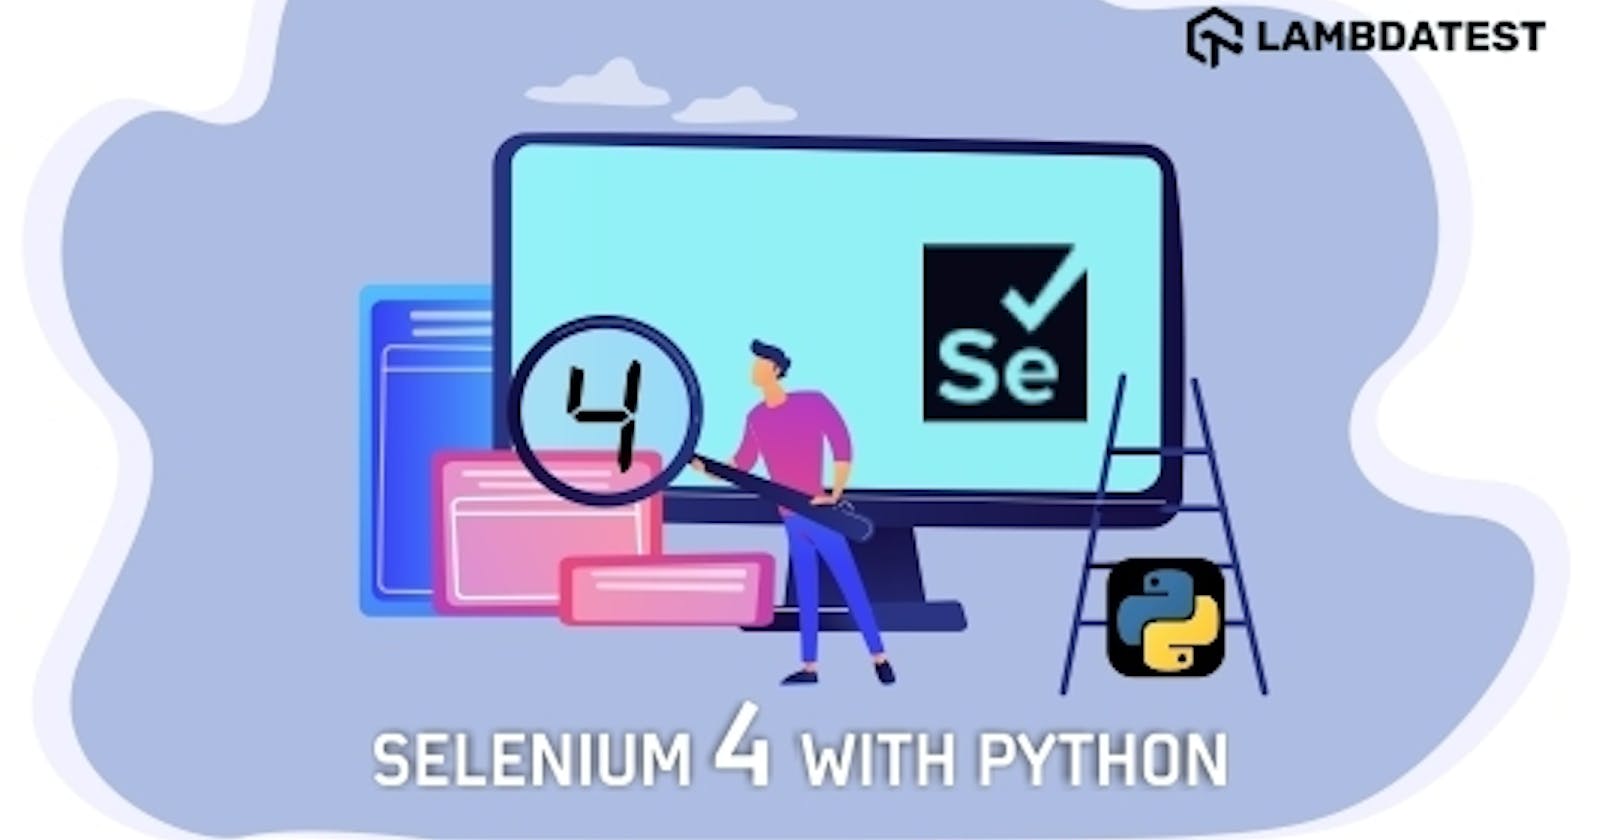 Selenium 4 With Python: All You Need To Know